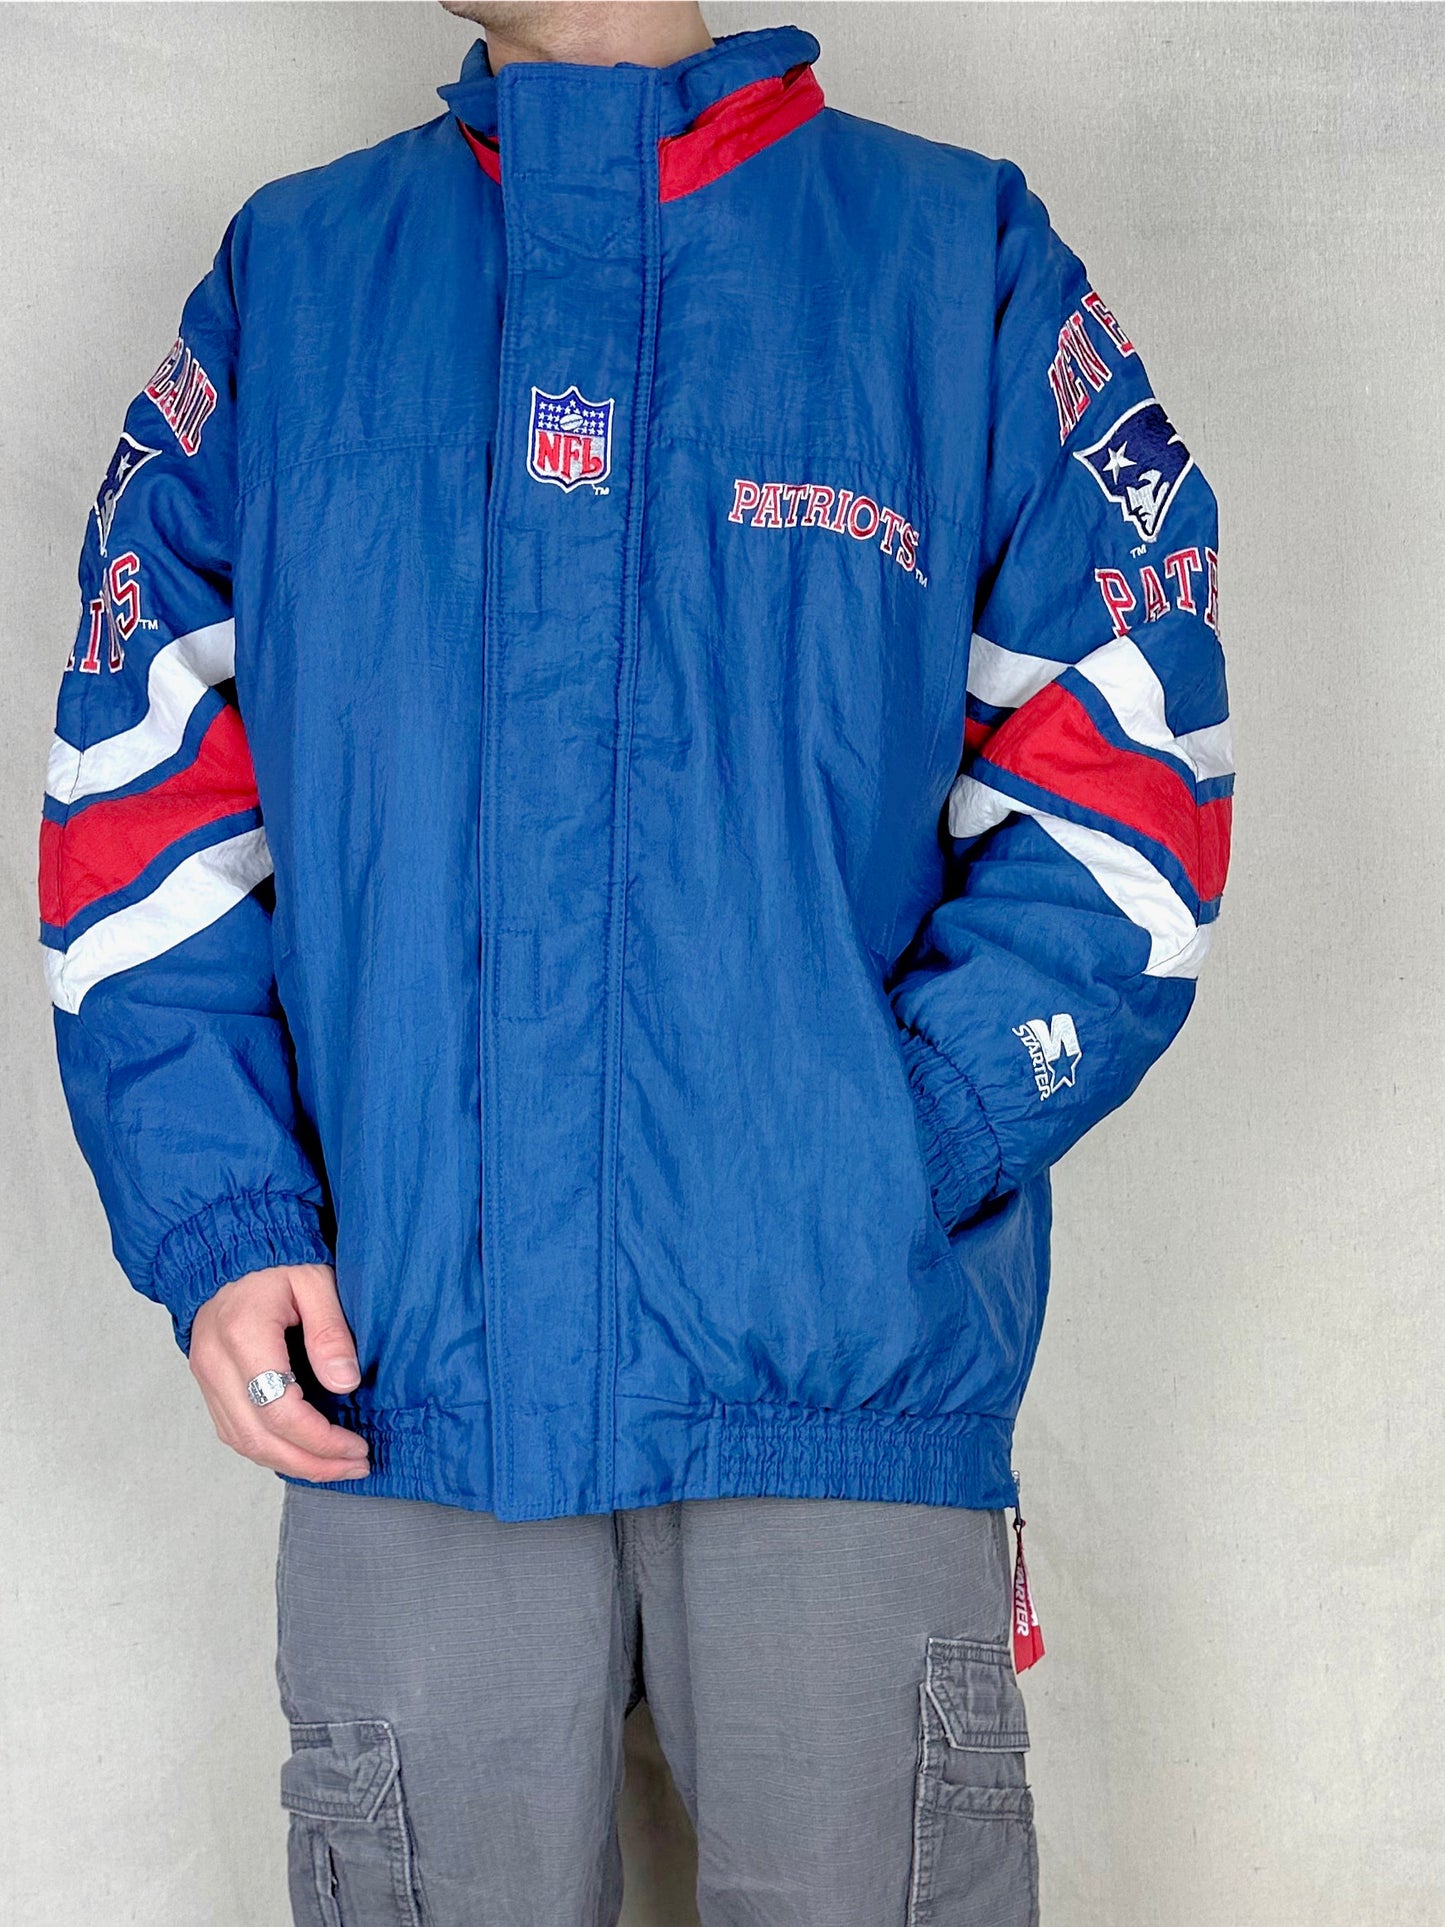 90's New England Patriots NFL Starter Embroidered Vintage Puffer Jacket Size XL-2XL